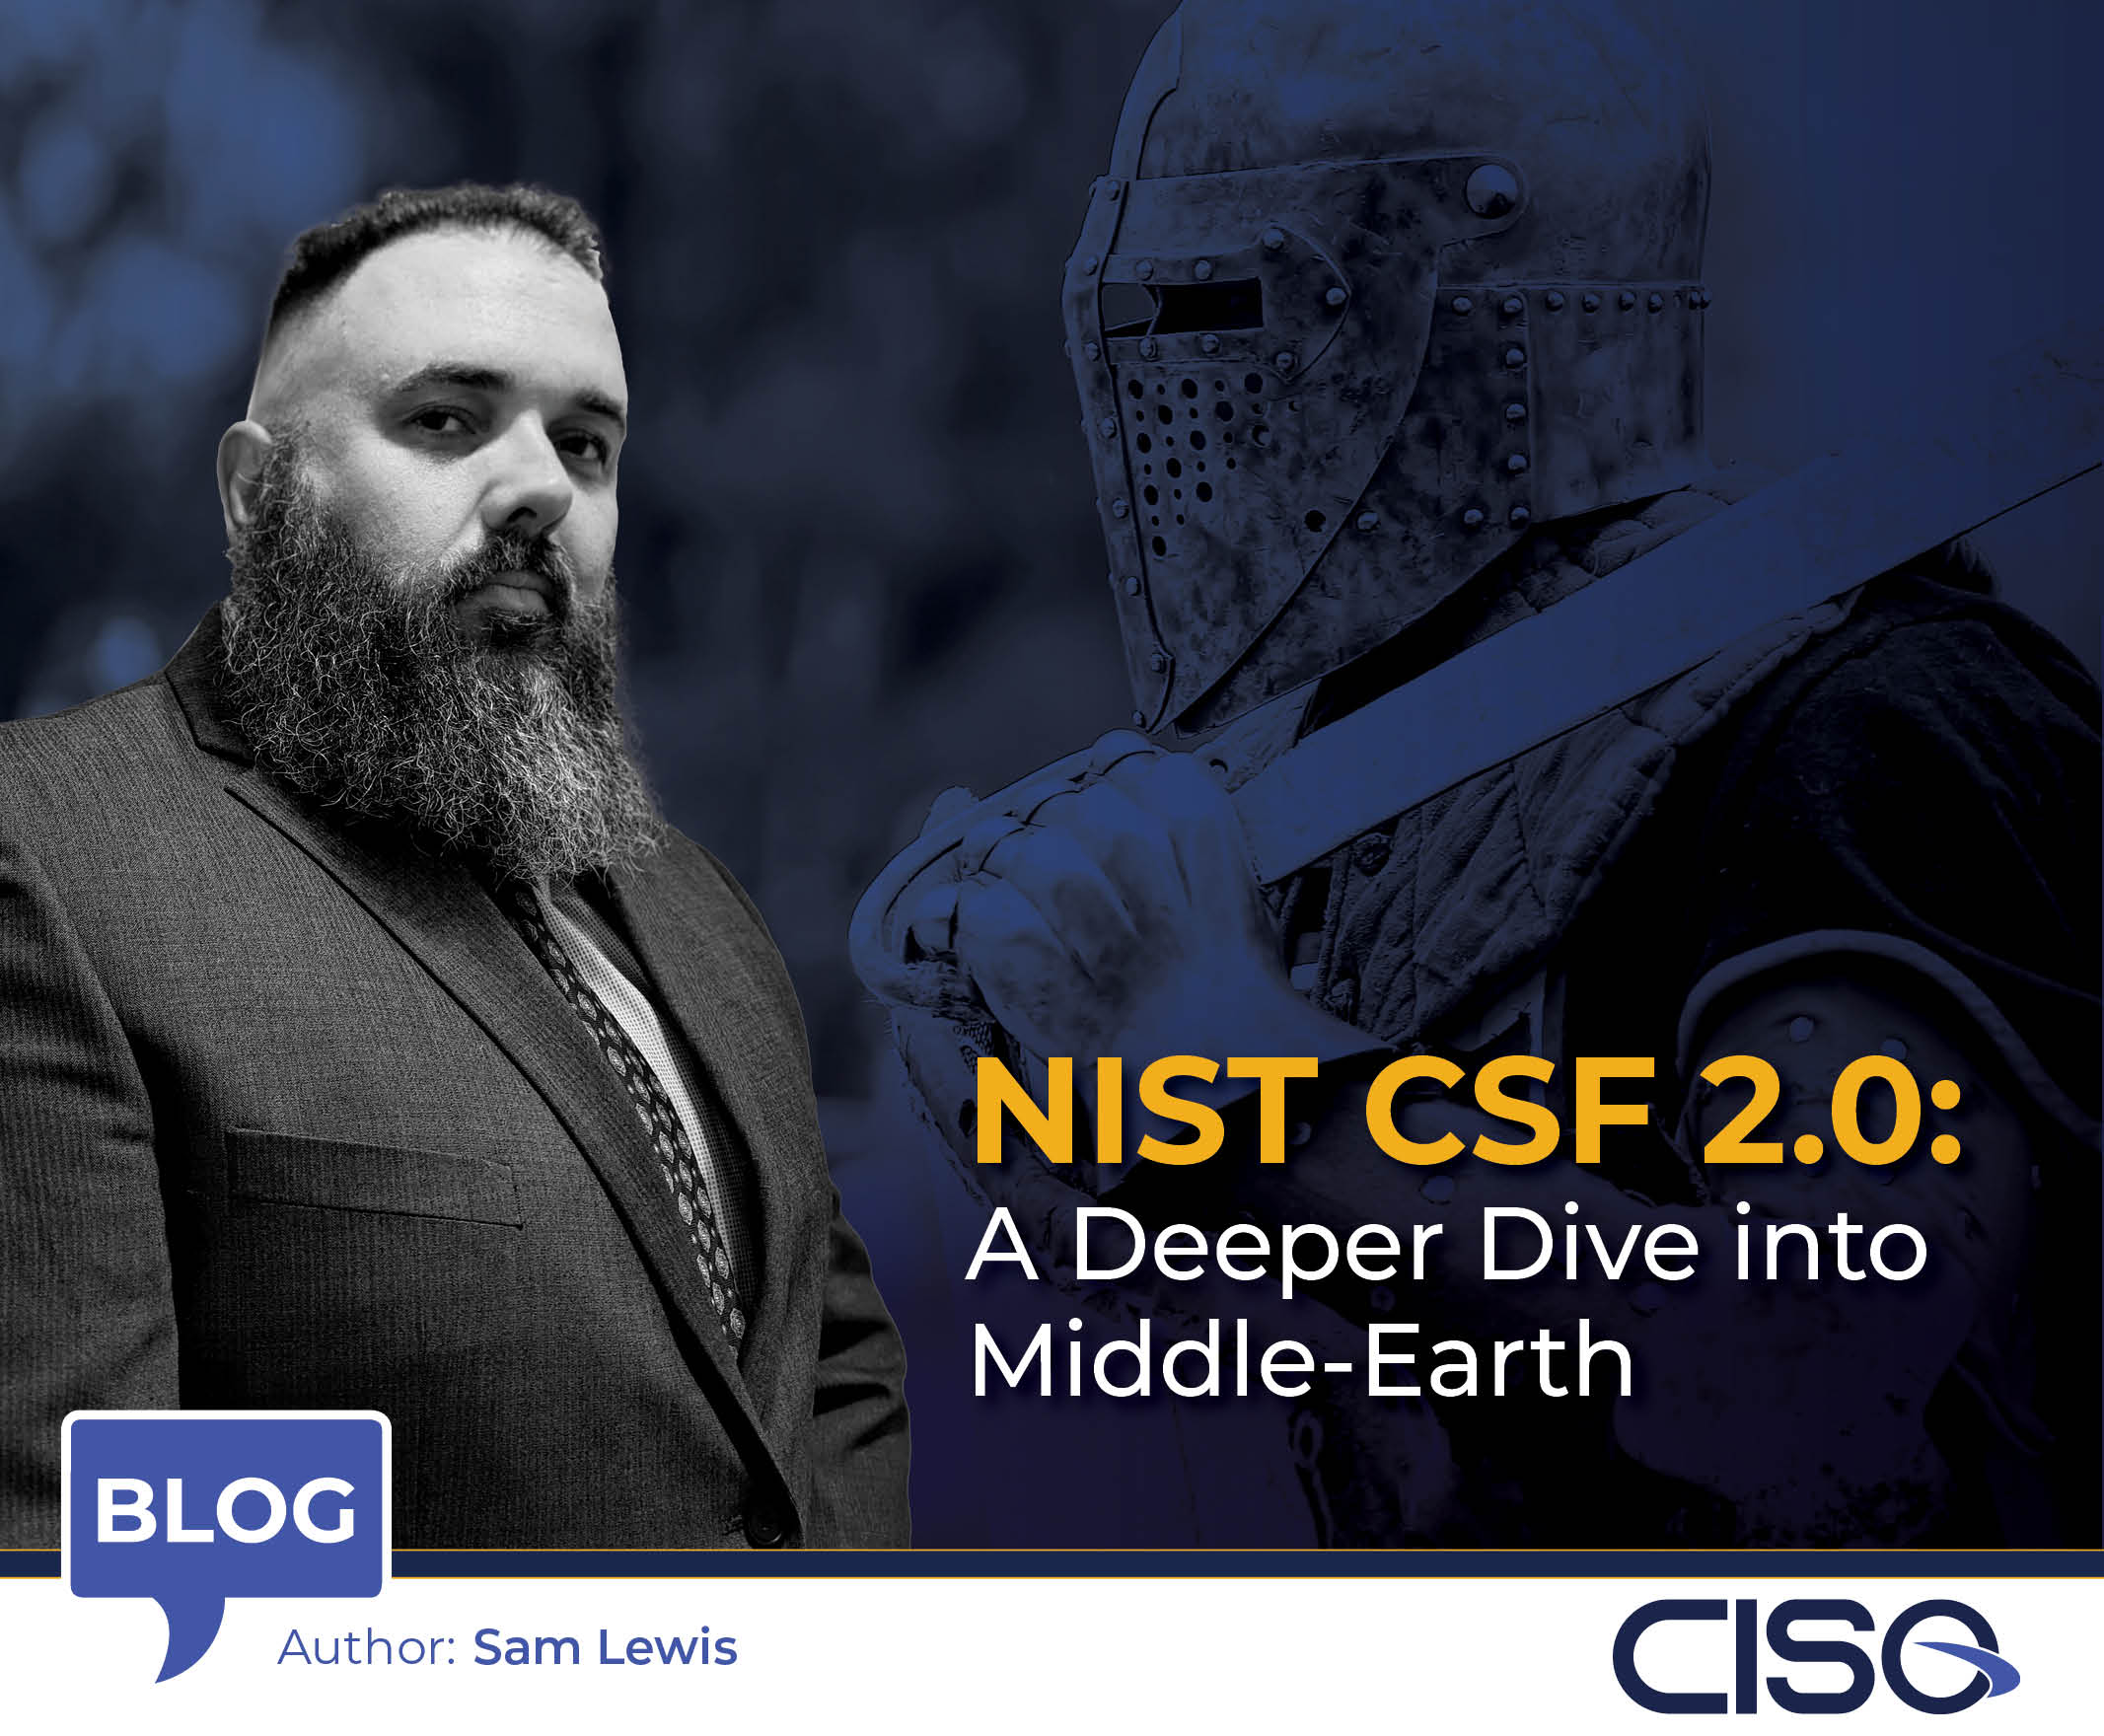 NIST CSF 2.0: A Deeper Dive into Middle-Earth 